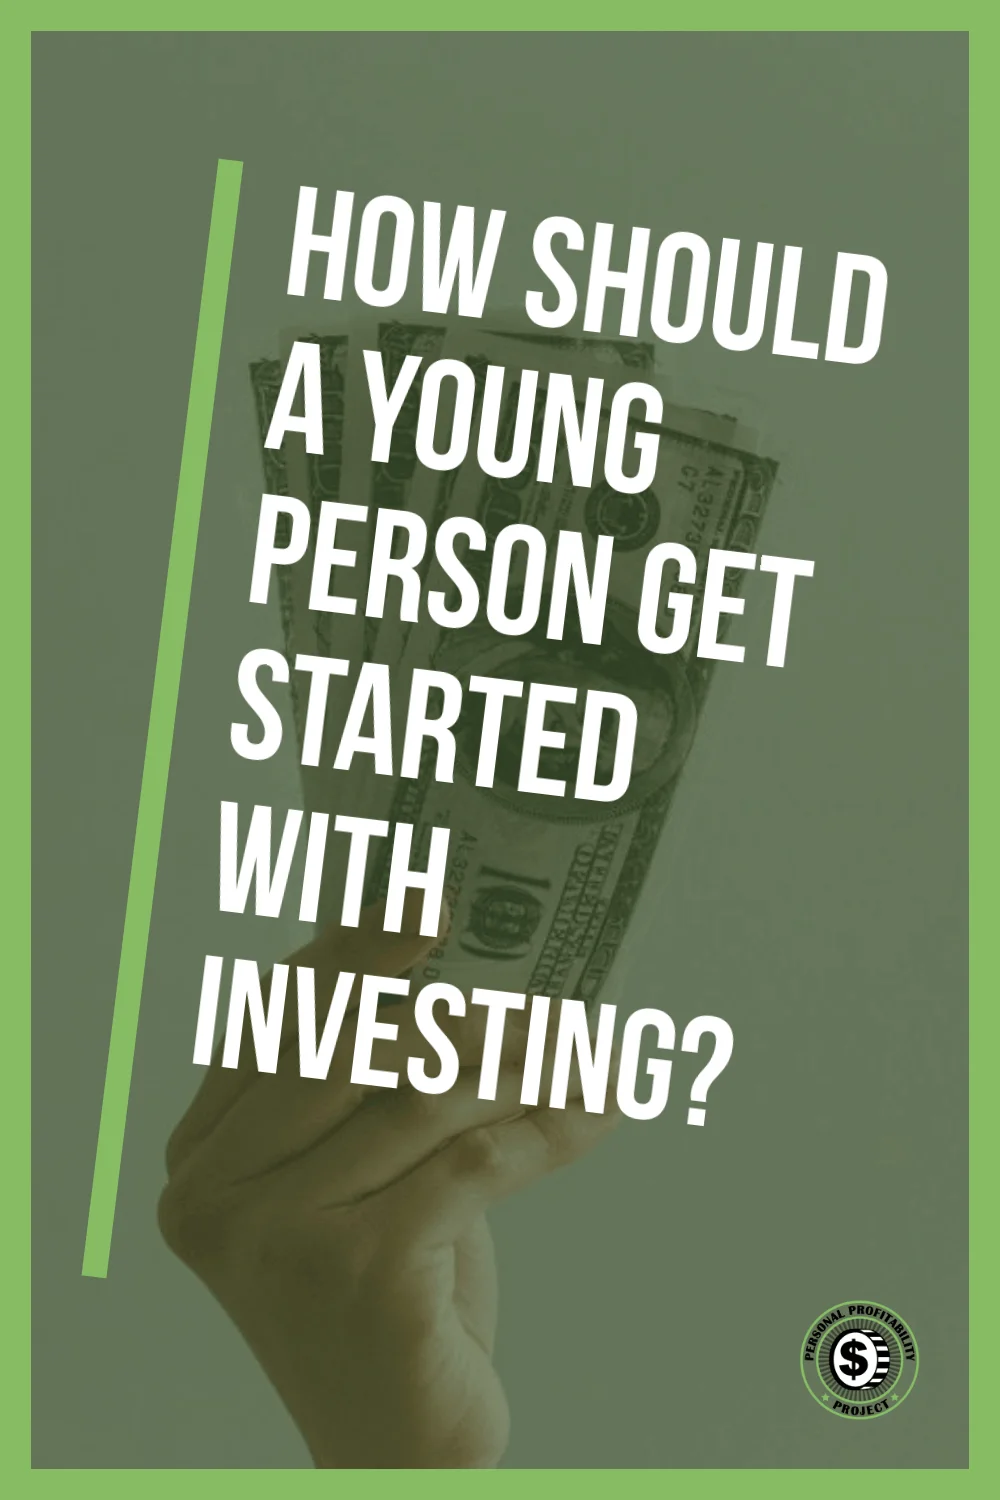 How Should a Young Person Get Started with Investing